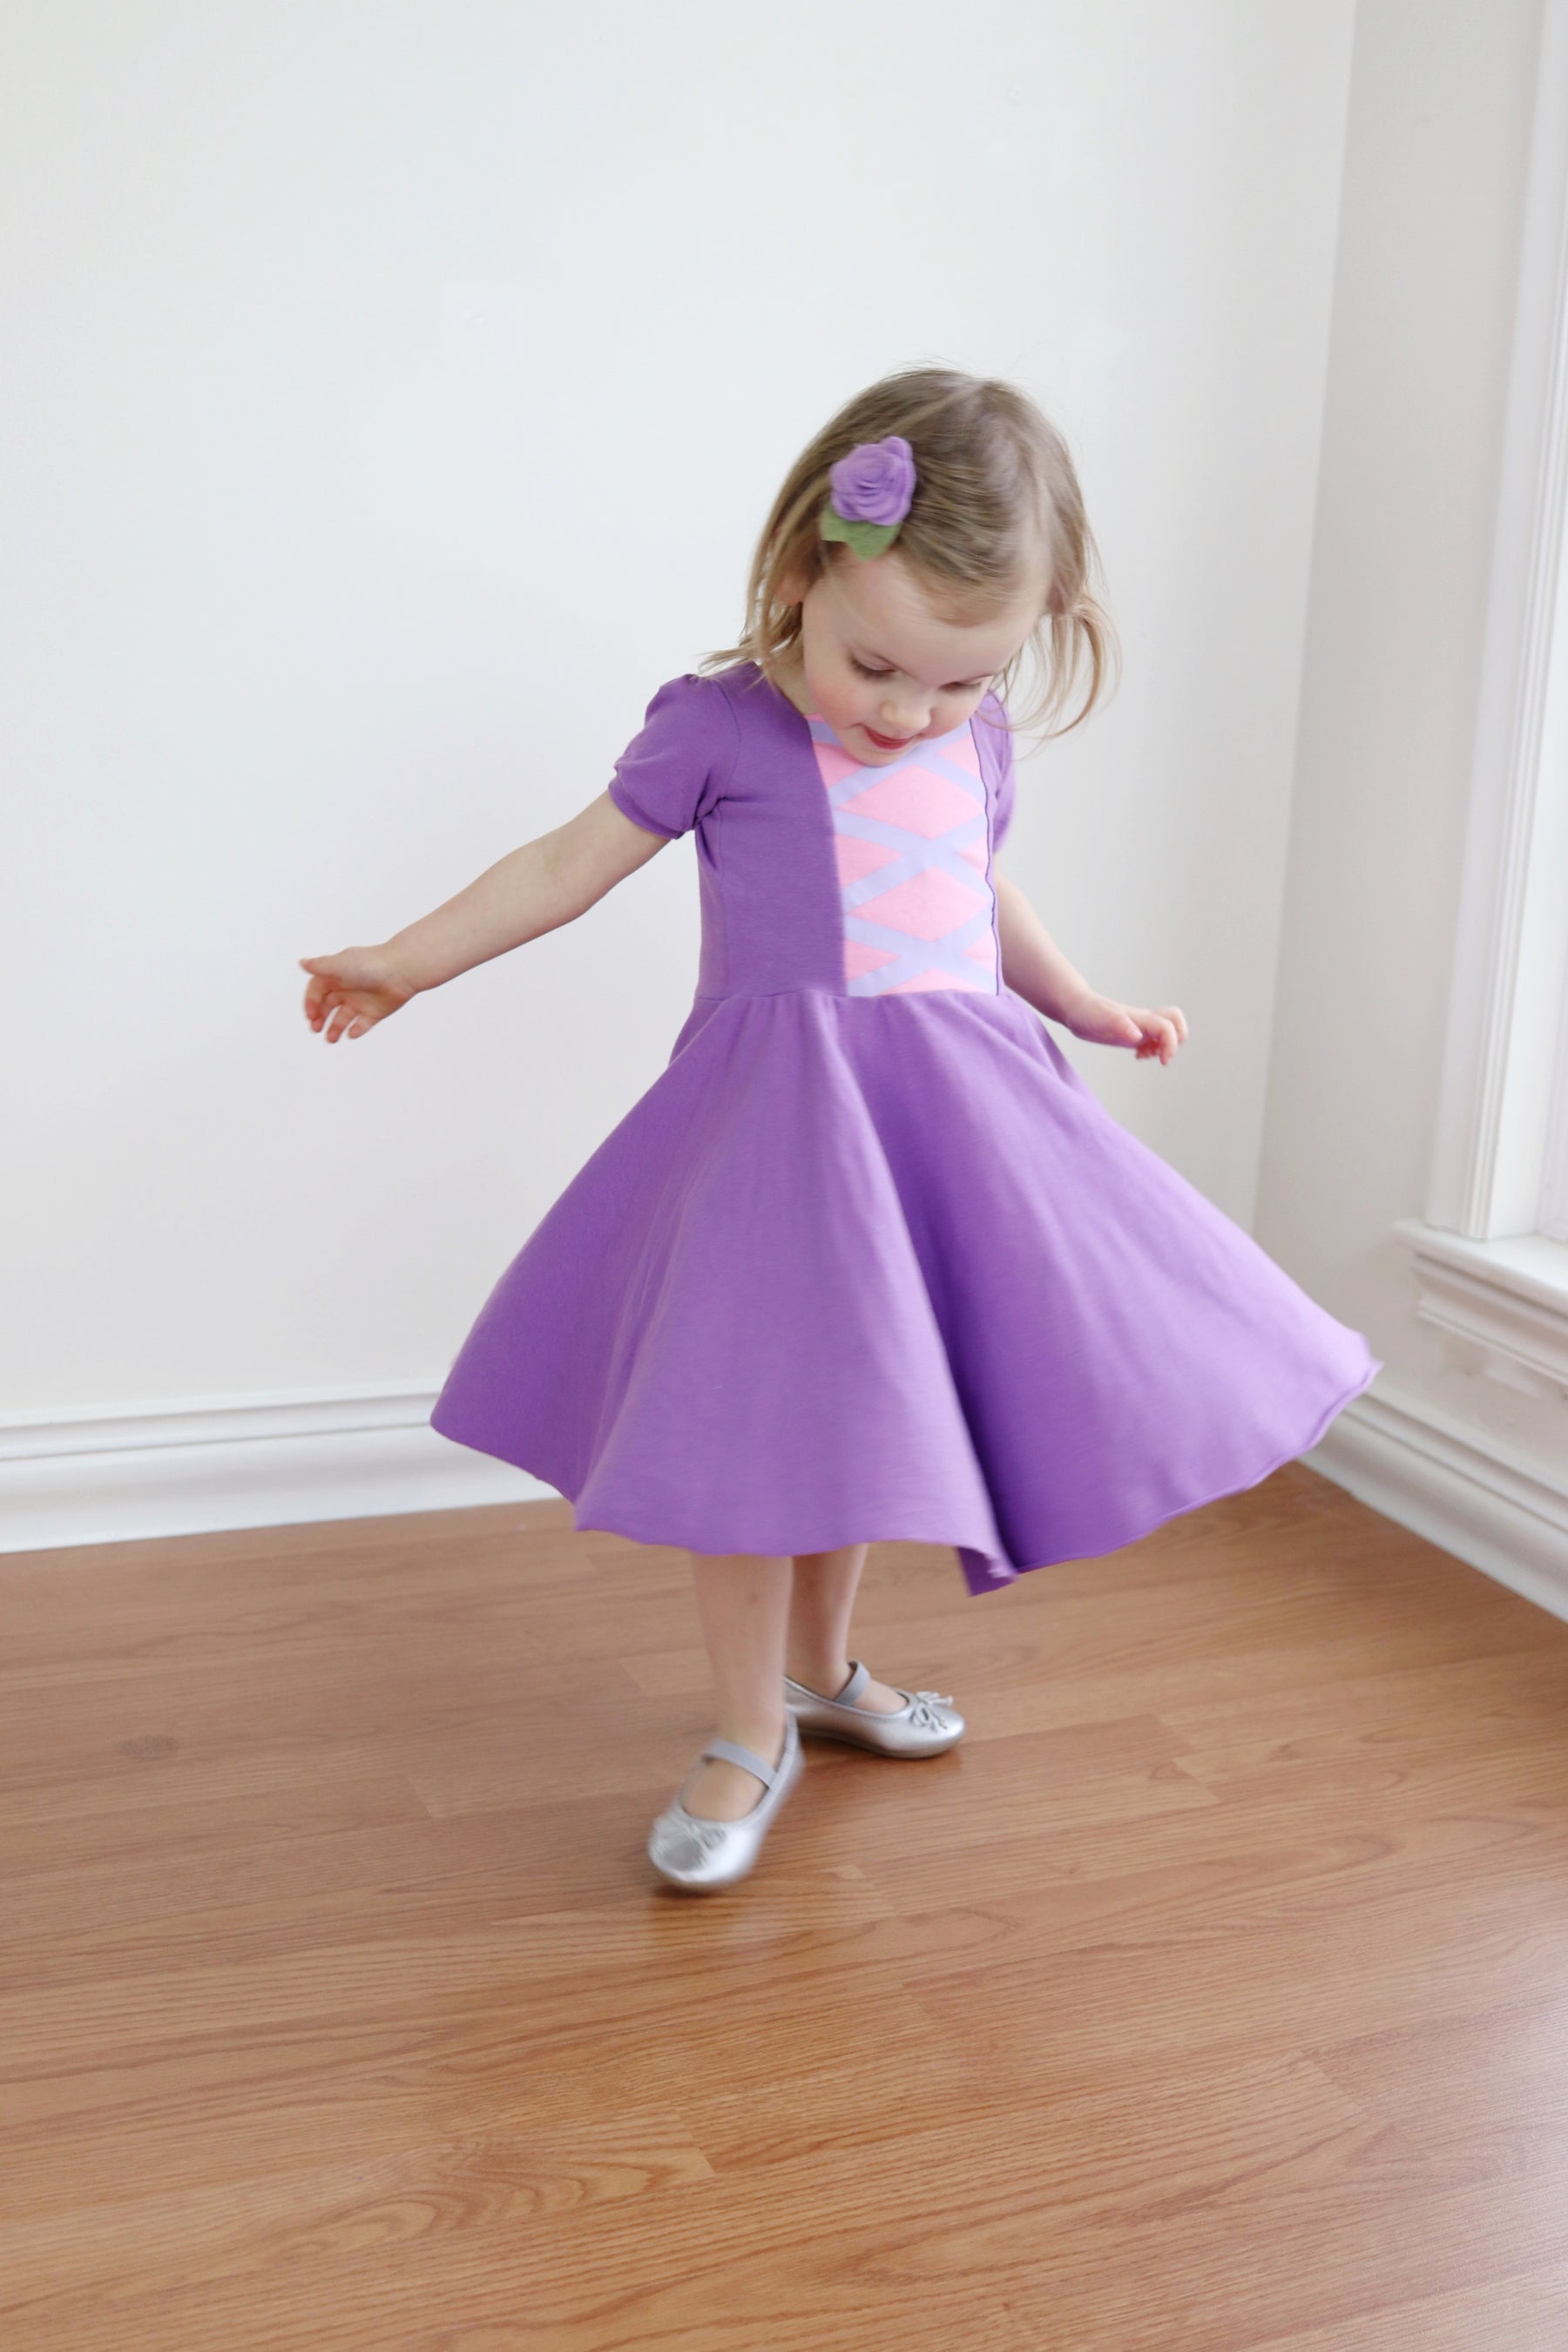 CLEARANCE SALE - Once Upon a Princess Capsule